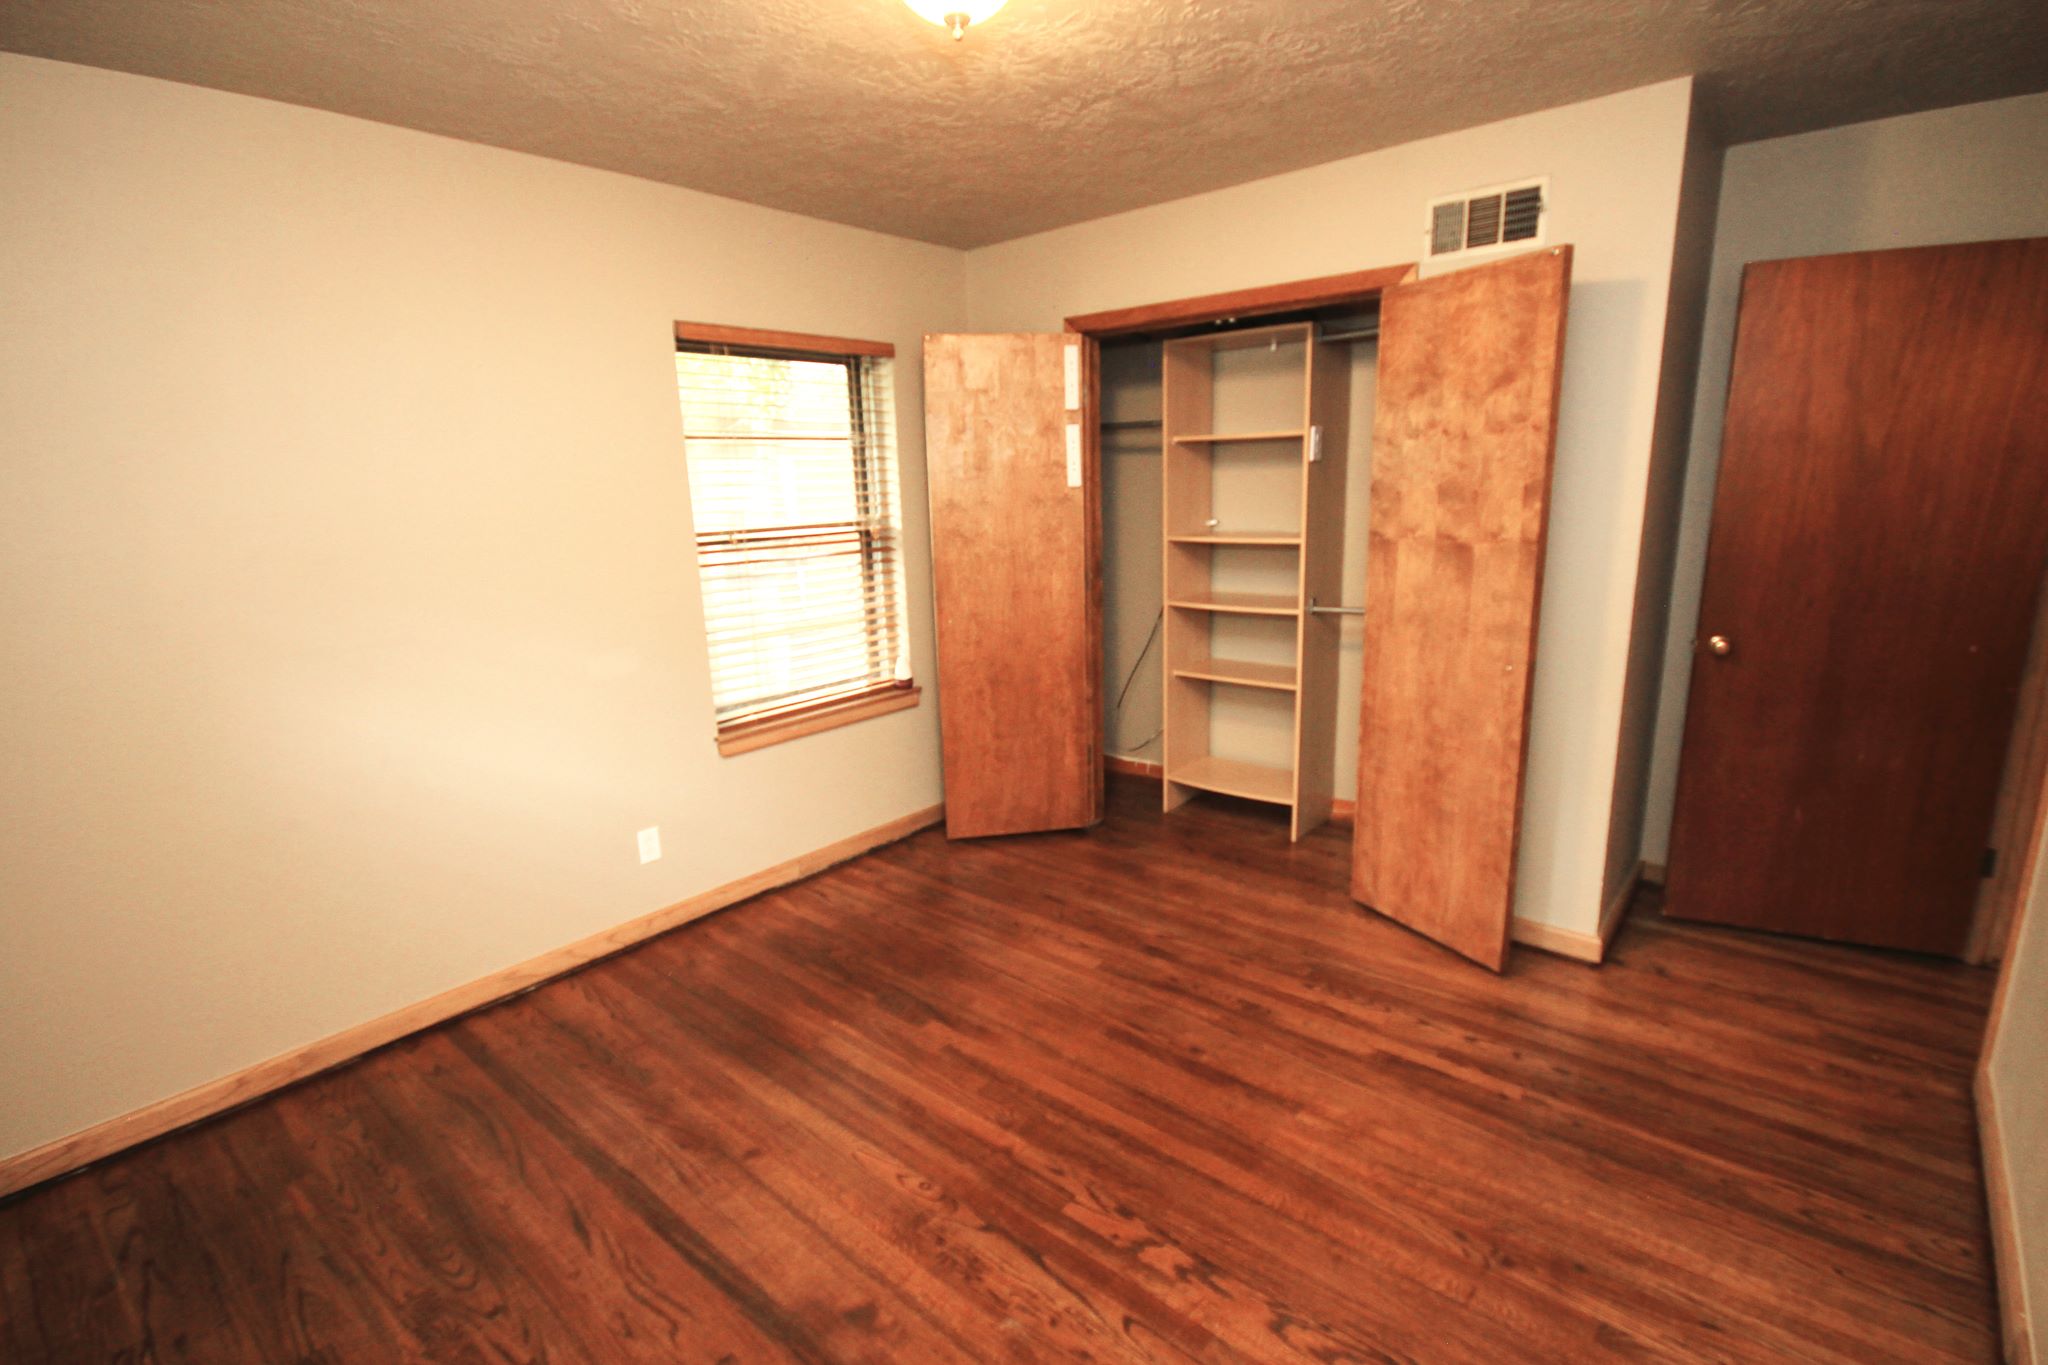 A bedroom with wooden floors and two large closets.